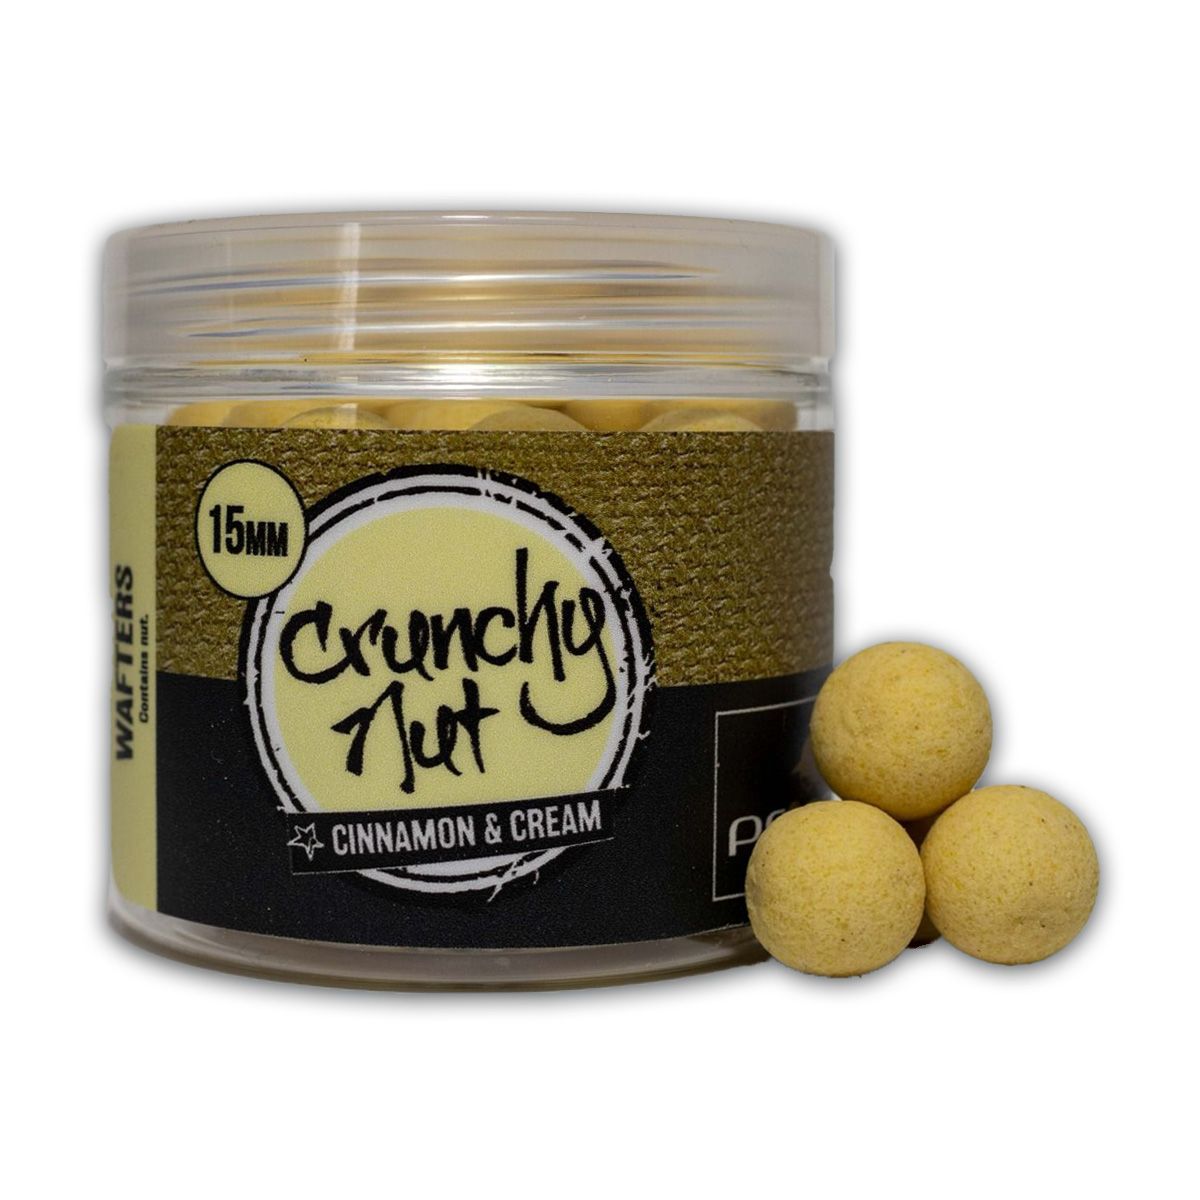 https://www.total-fishing-tackle.com/media/catalog/product/cache/c4fc4656f1ace5fcc9cefe1458e45406/p/r/proper-carp-baits-crunchy-nut-wafters-1_1.jpg